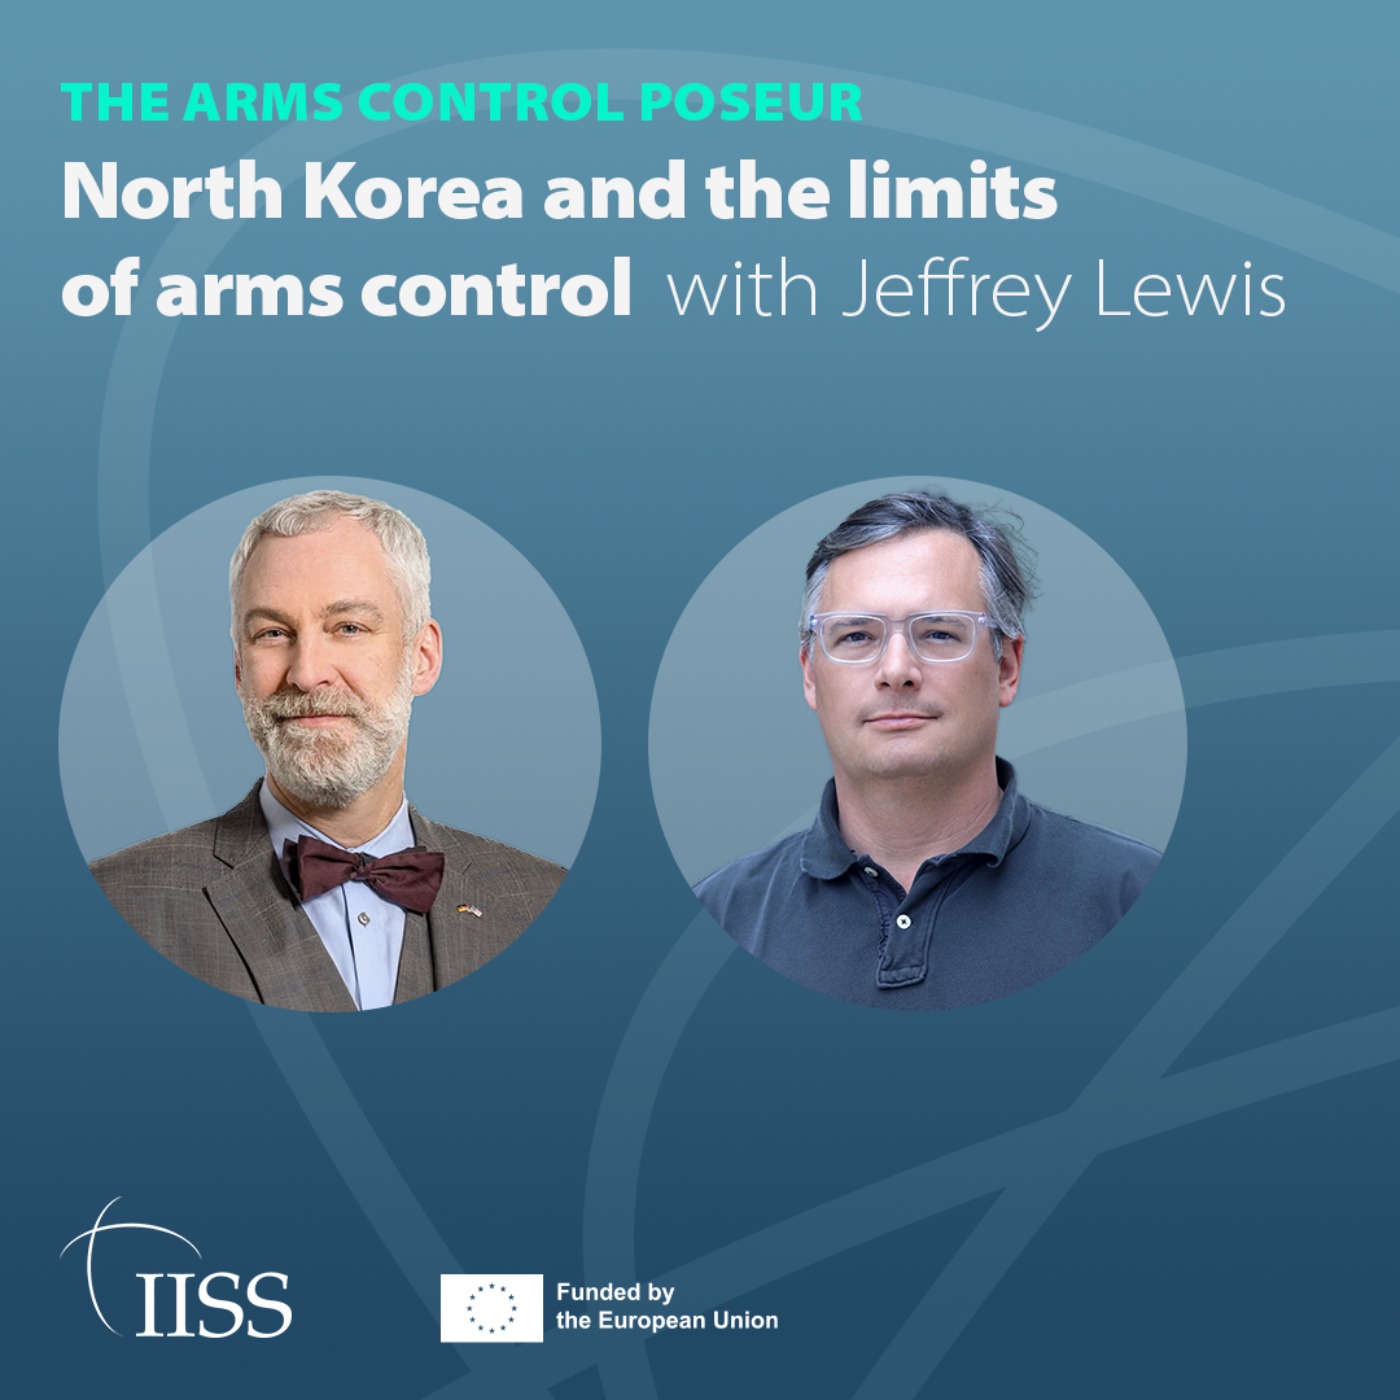 North Korea and the limits of arms control with Jeffrey Lewis